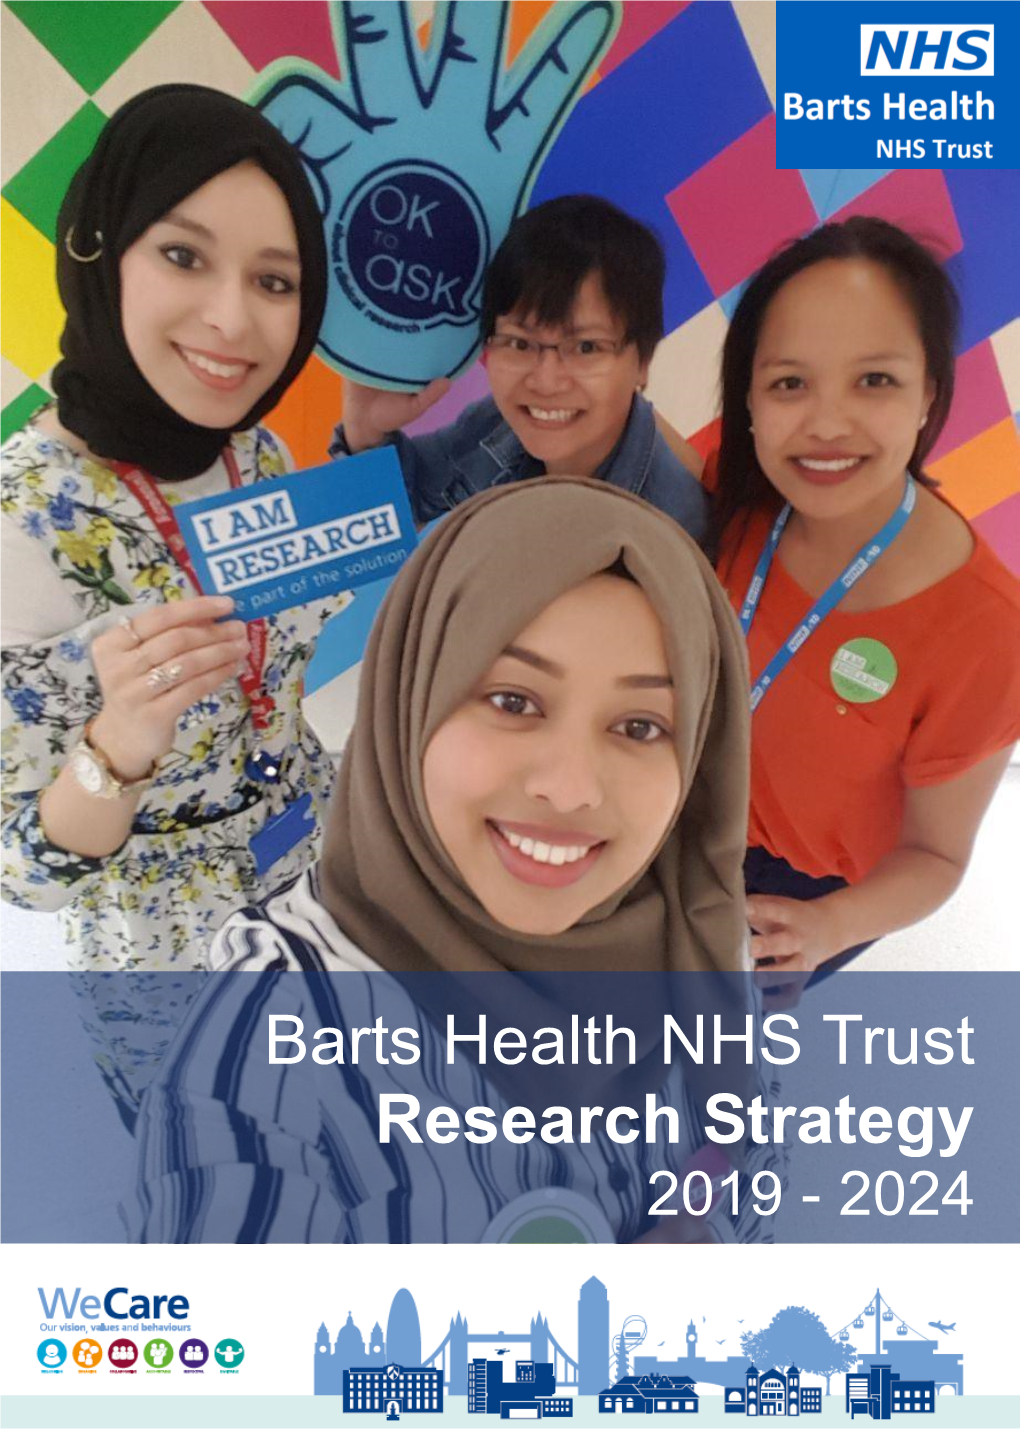 Barts Health NHS Trust Research Strategy 2019 - 2024